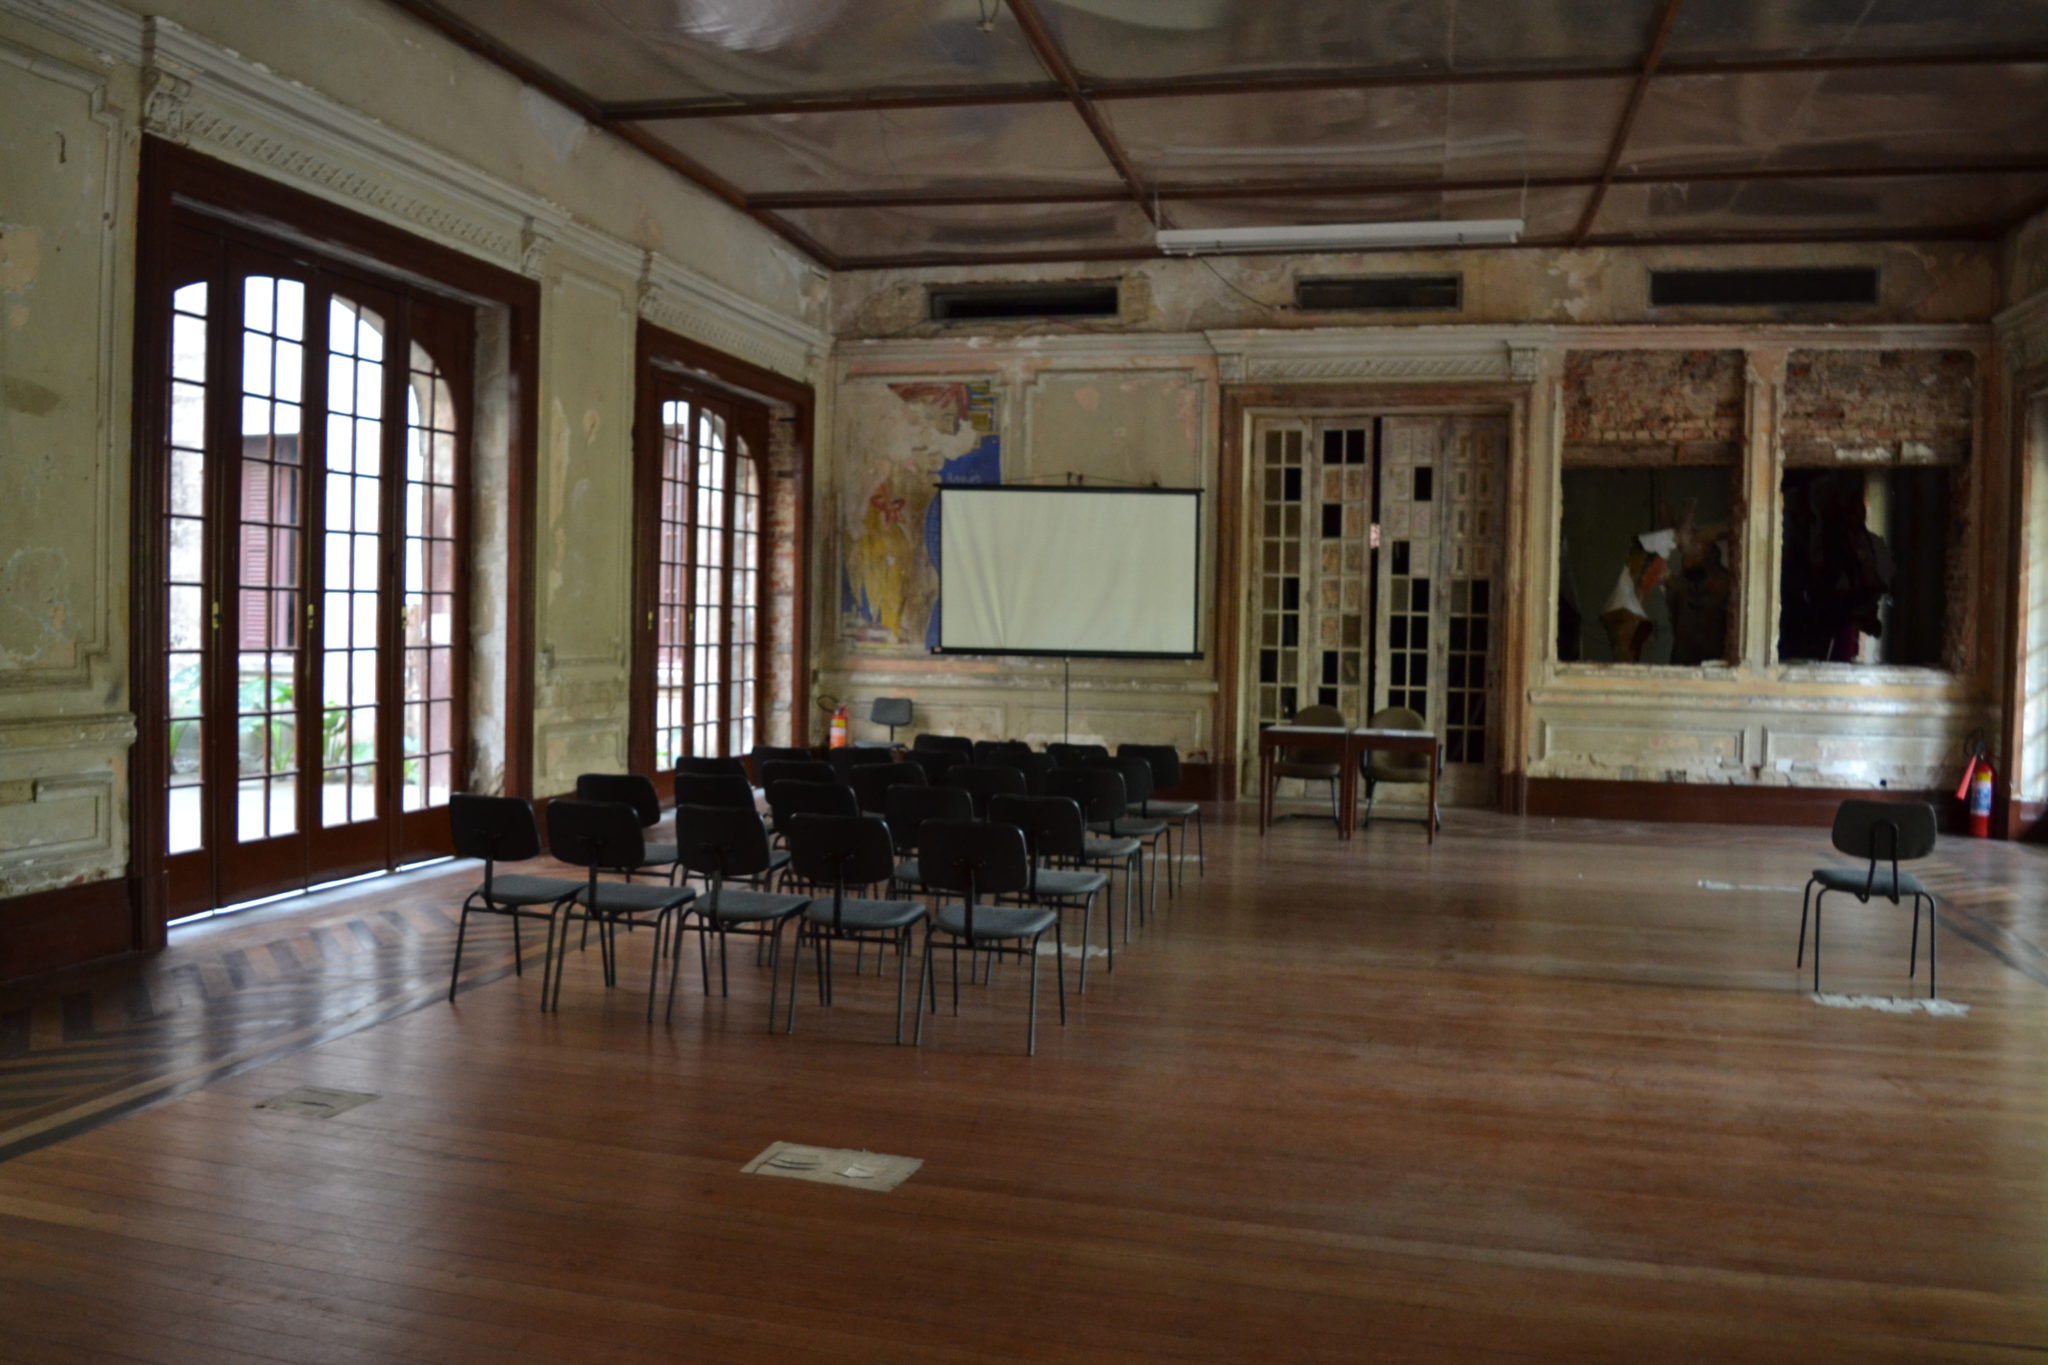 An old, empty meeting room with black chairs and a projector screen.